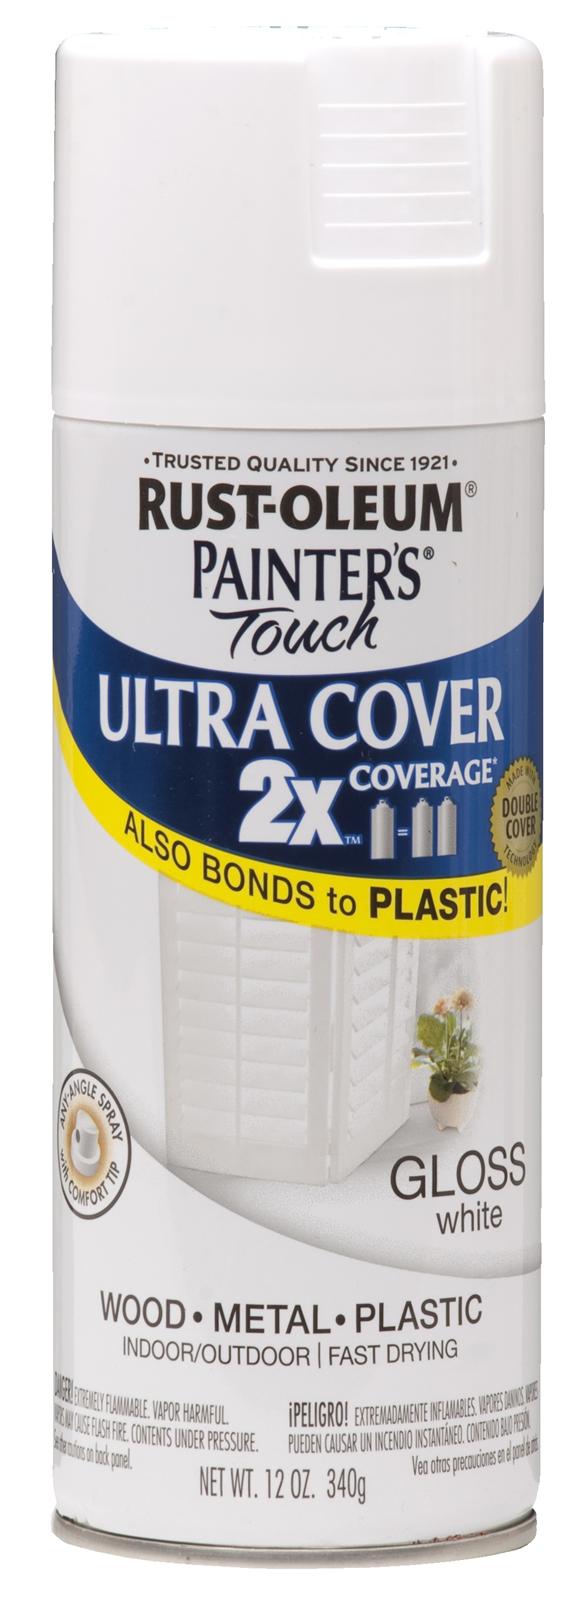 Rust-Oleum 12oz 2X Painter's Touch Ultra Cover Gloss Spray Paint